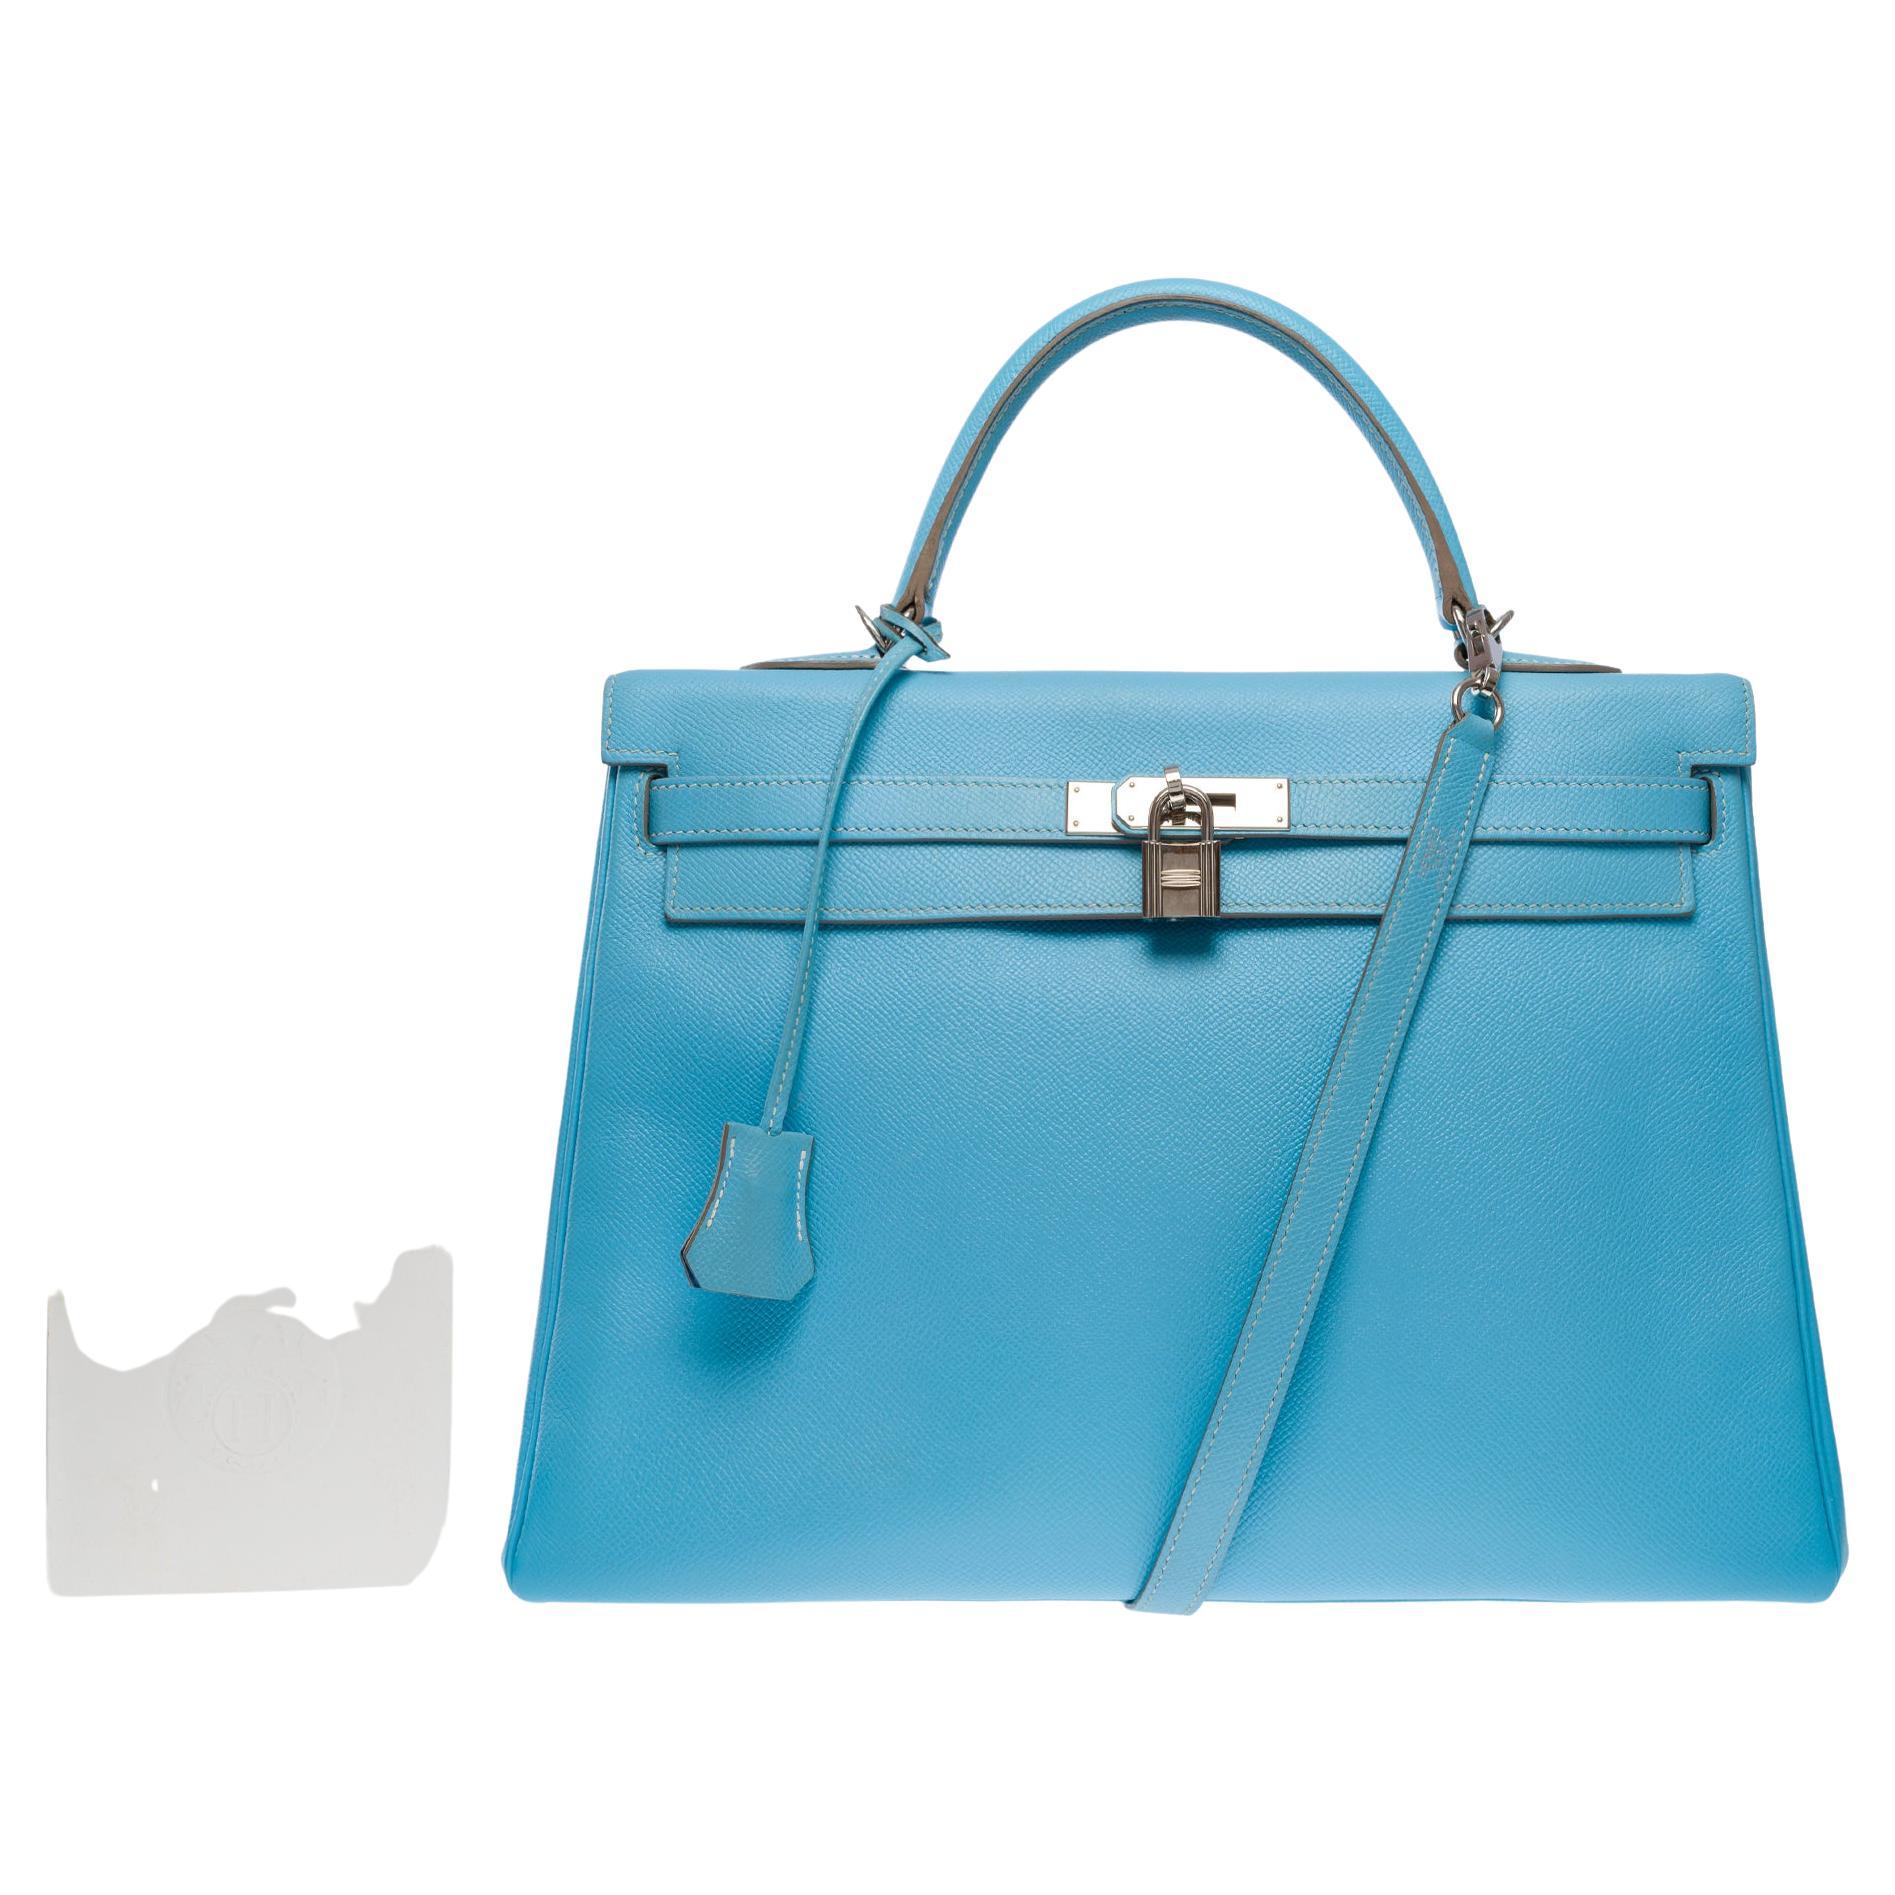 Magnificent & Rare Hermes Kelly 35 retourne  from the Candy limited edition Collection in Blue Celeste Epsom leather with white stitching and Mykonos blue leather interior, palladium silver metal hardware, double blue leather handle for hand or